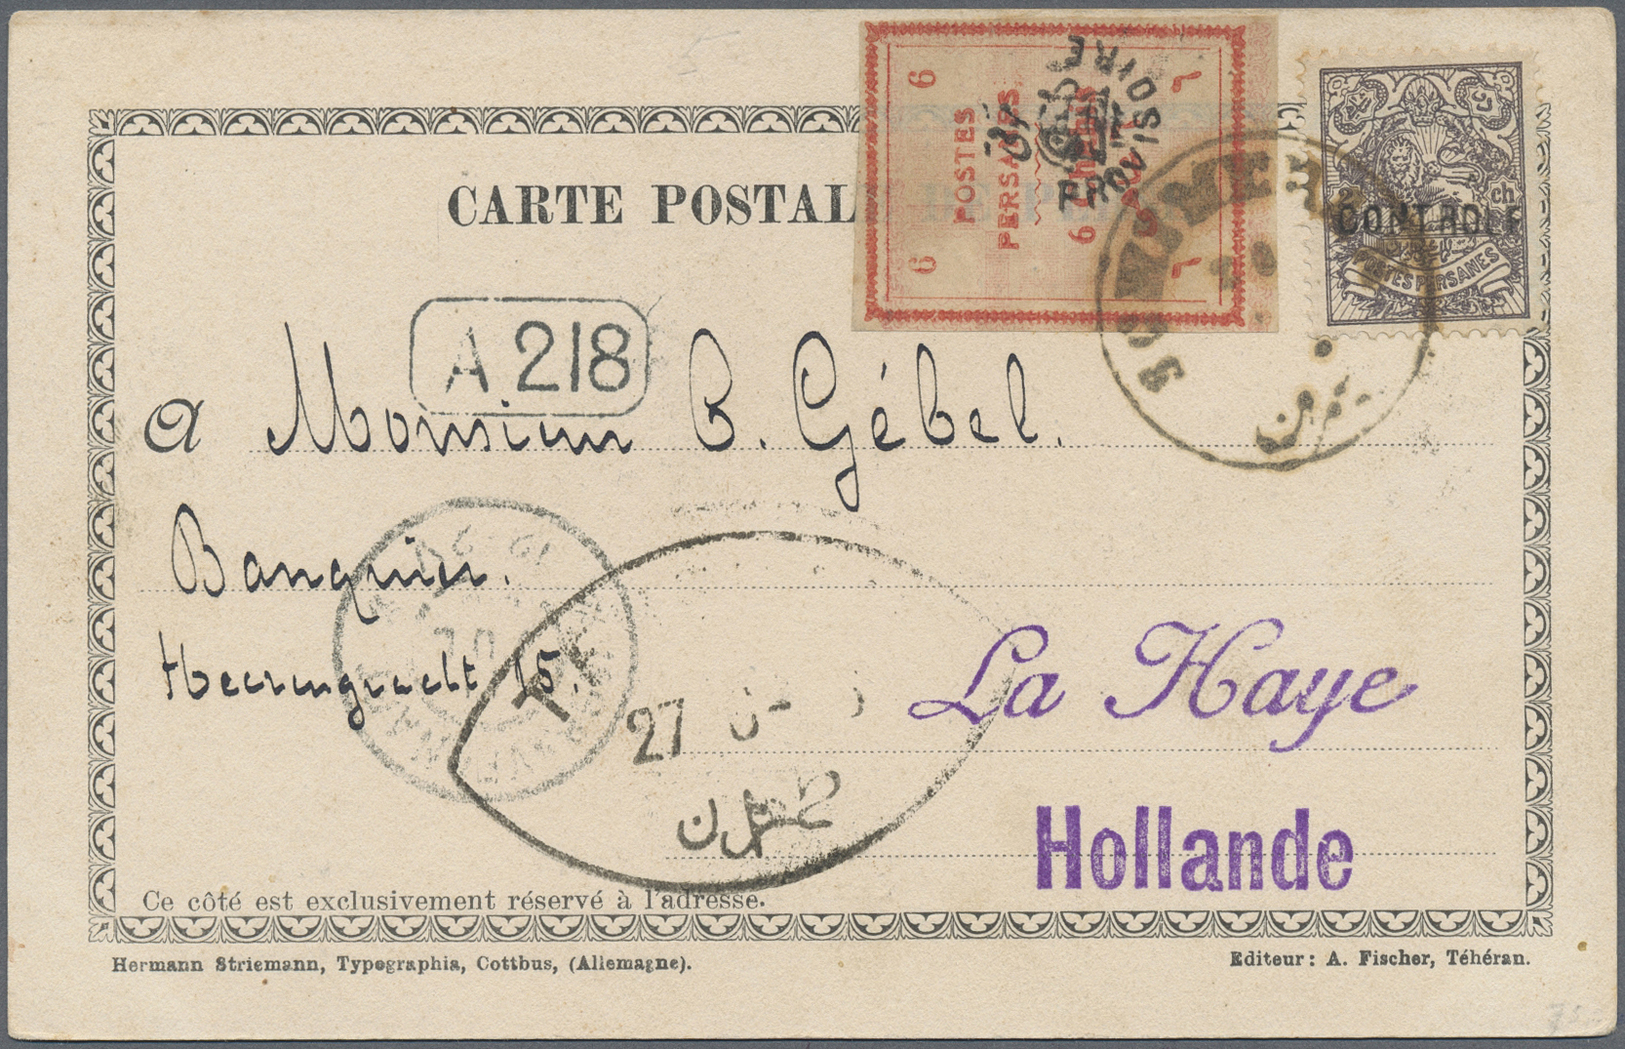 Br Iran: 1906. Picture Post Card Of 'Caravan Train' Addressed To Holland Bearing 'Controle' Yvert 223, 2c Grey And Yvert - Iran